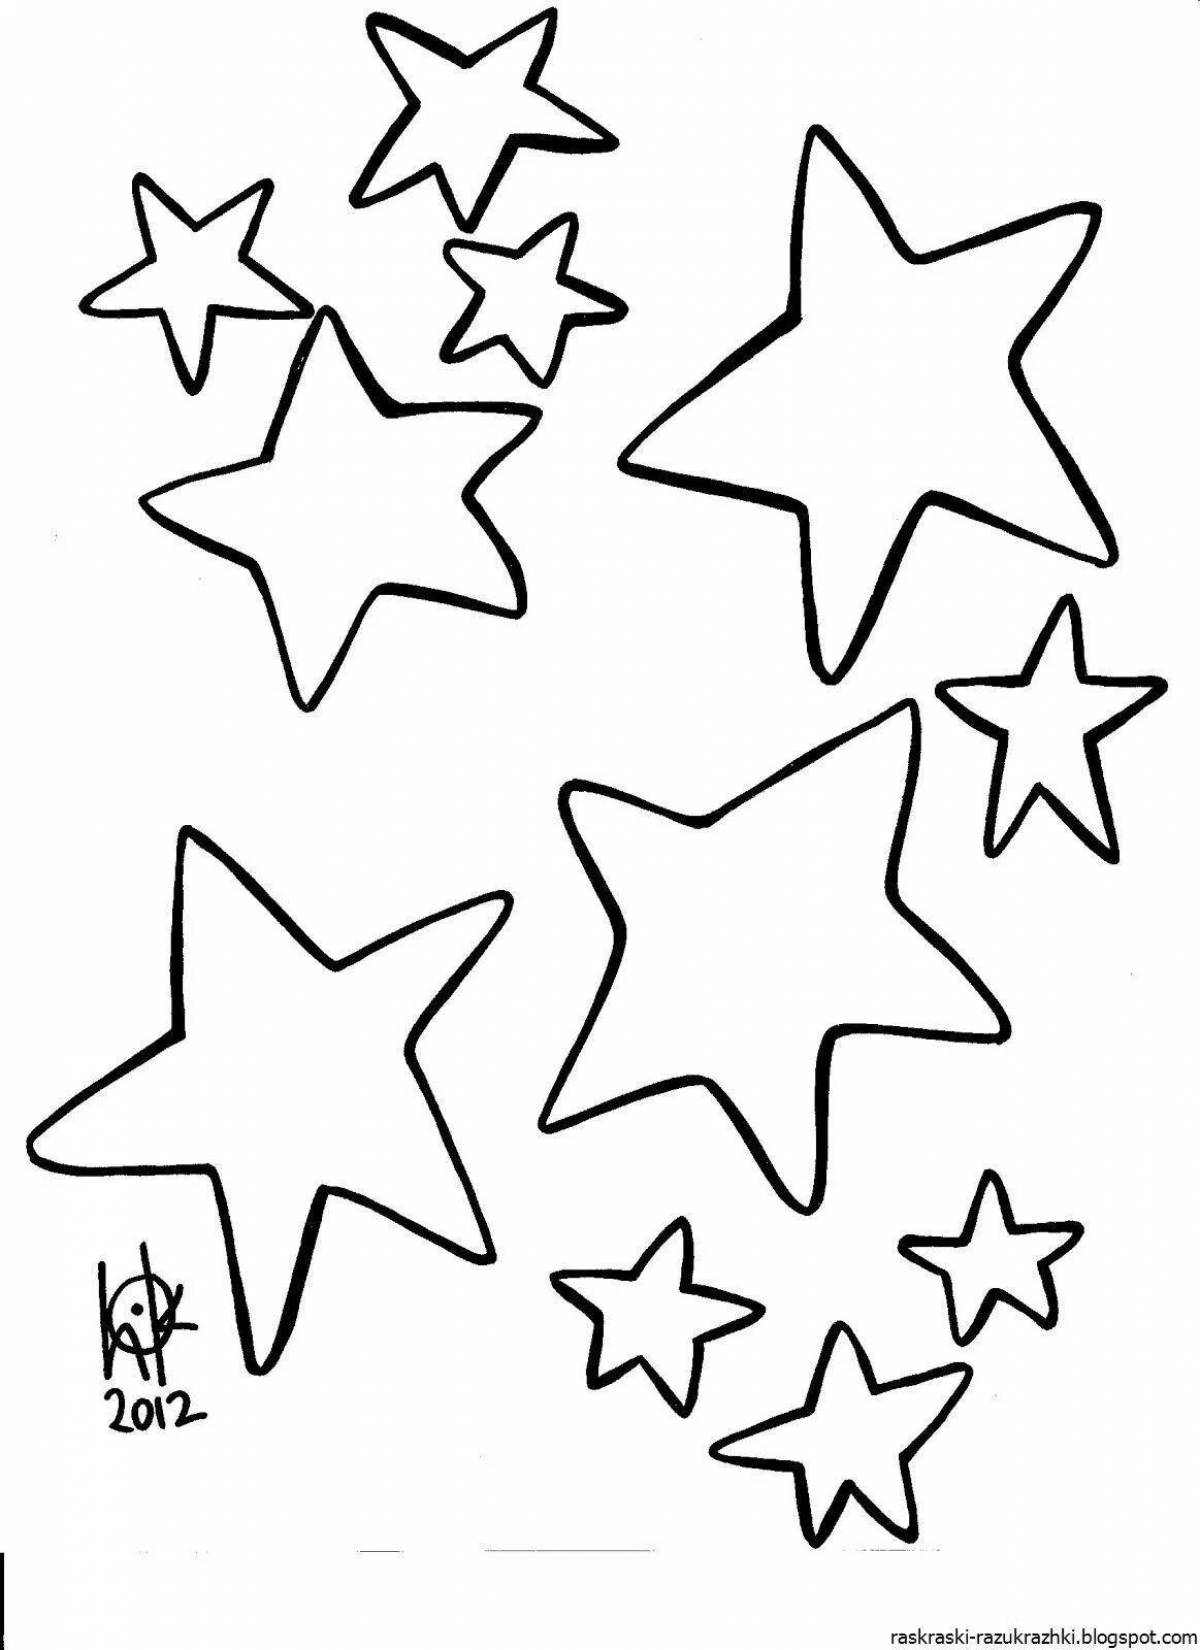 Attractive coloring picture of a star